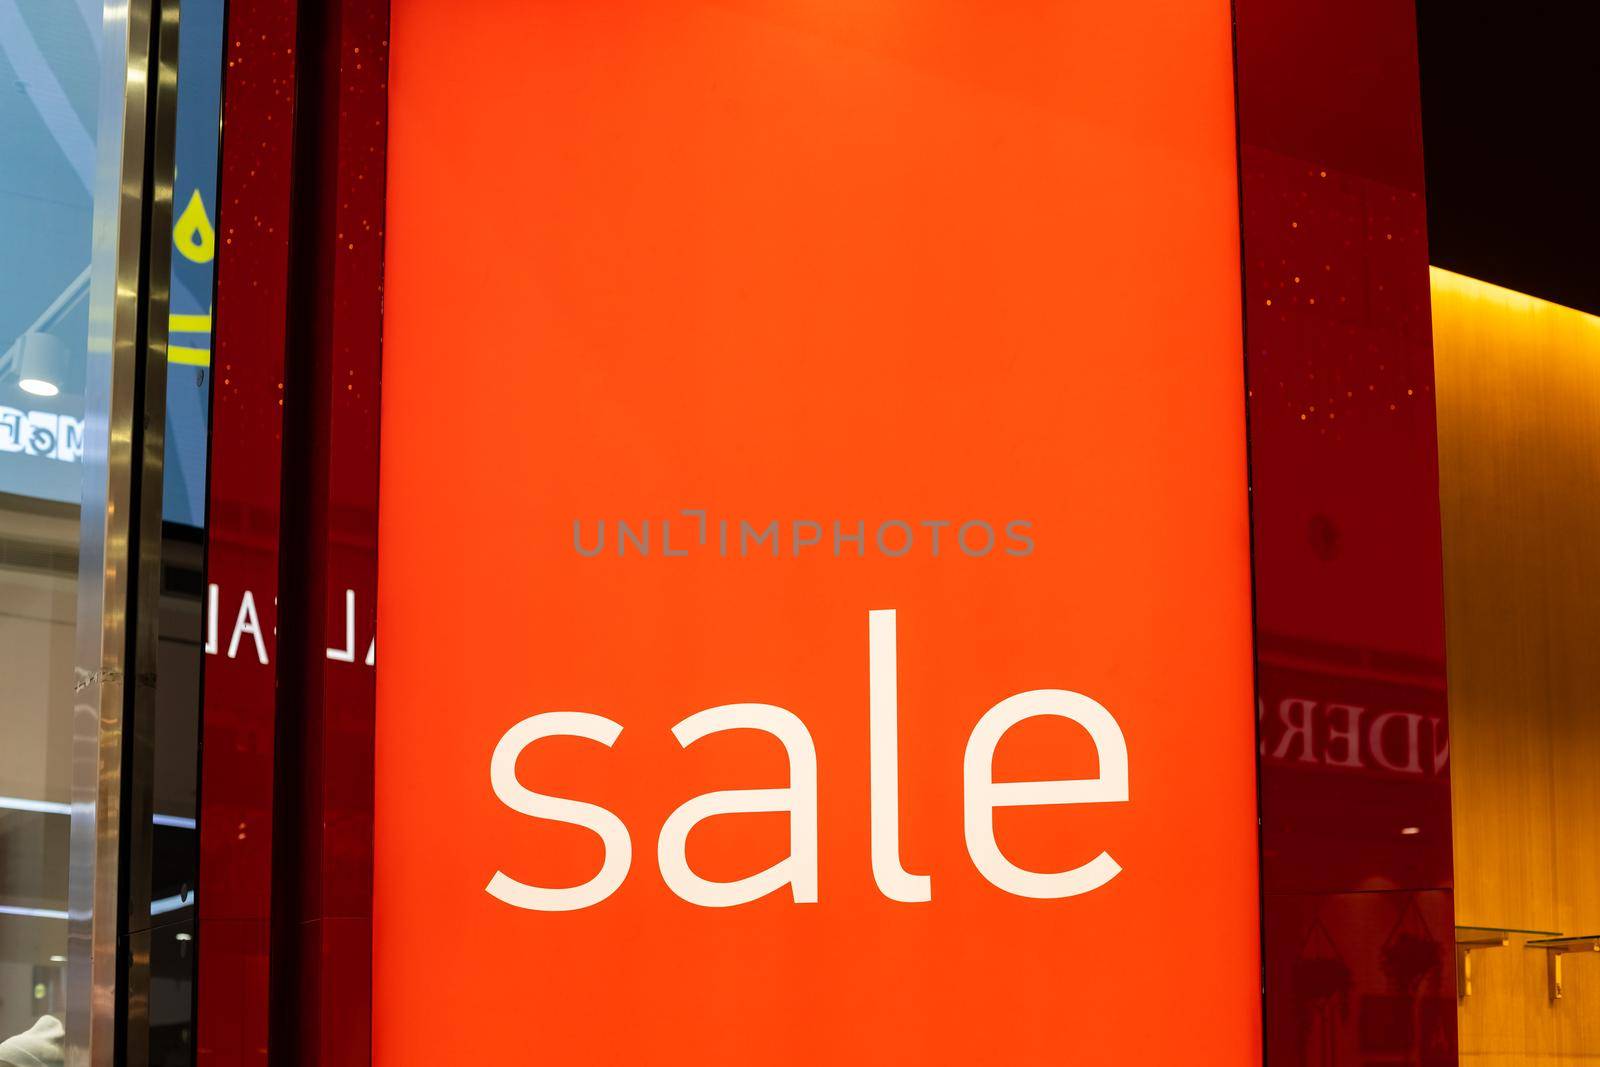 Sale sign at the entrance to clothing store - large red panels with white words.